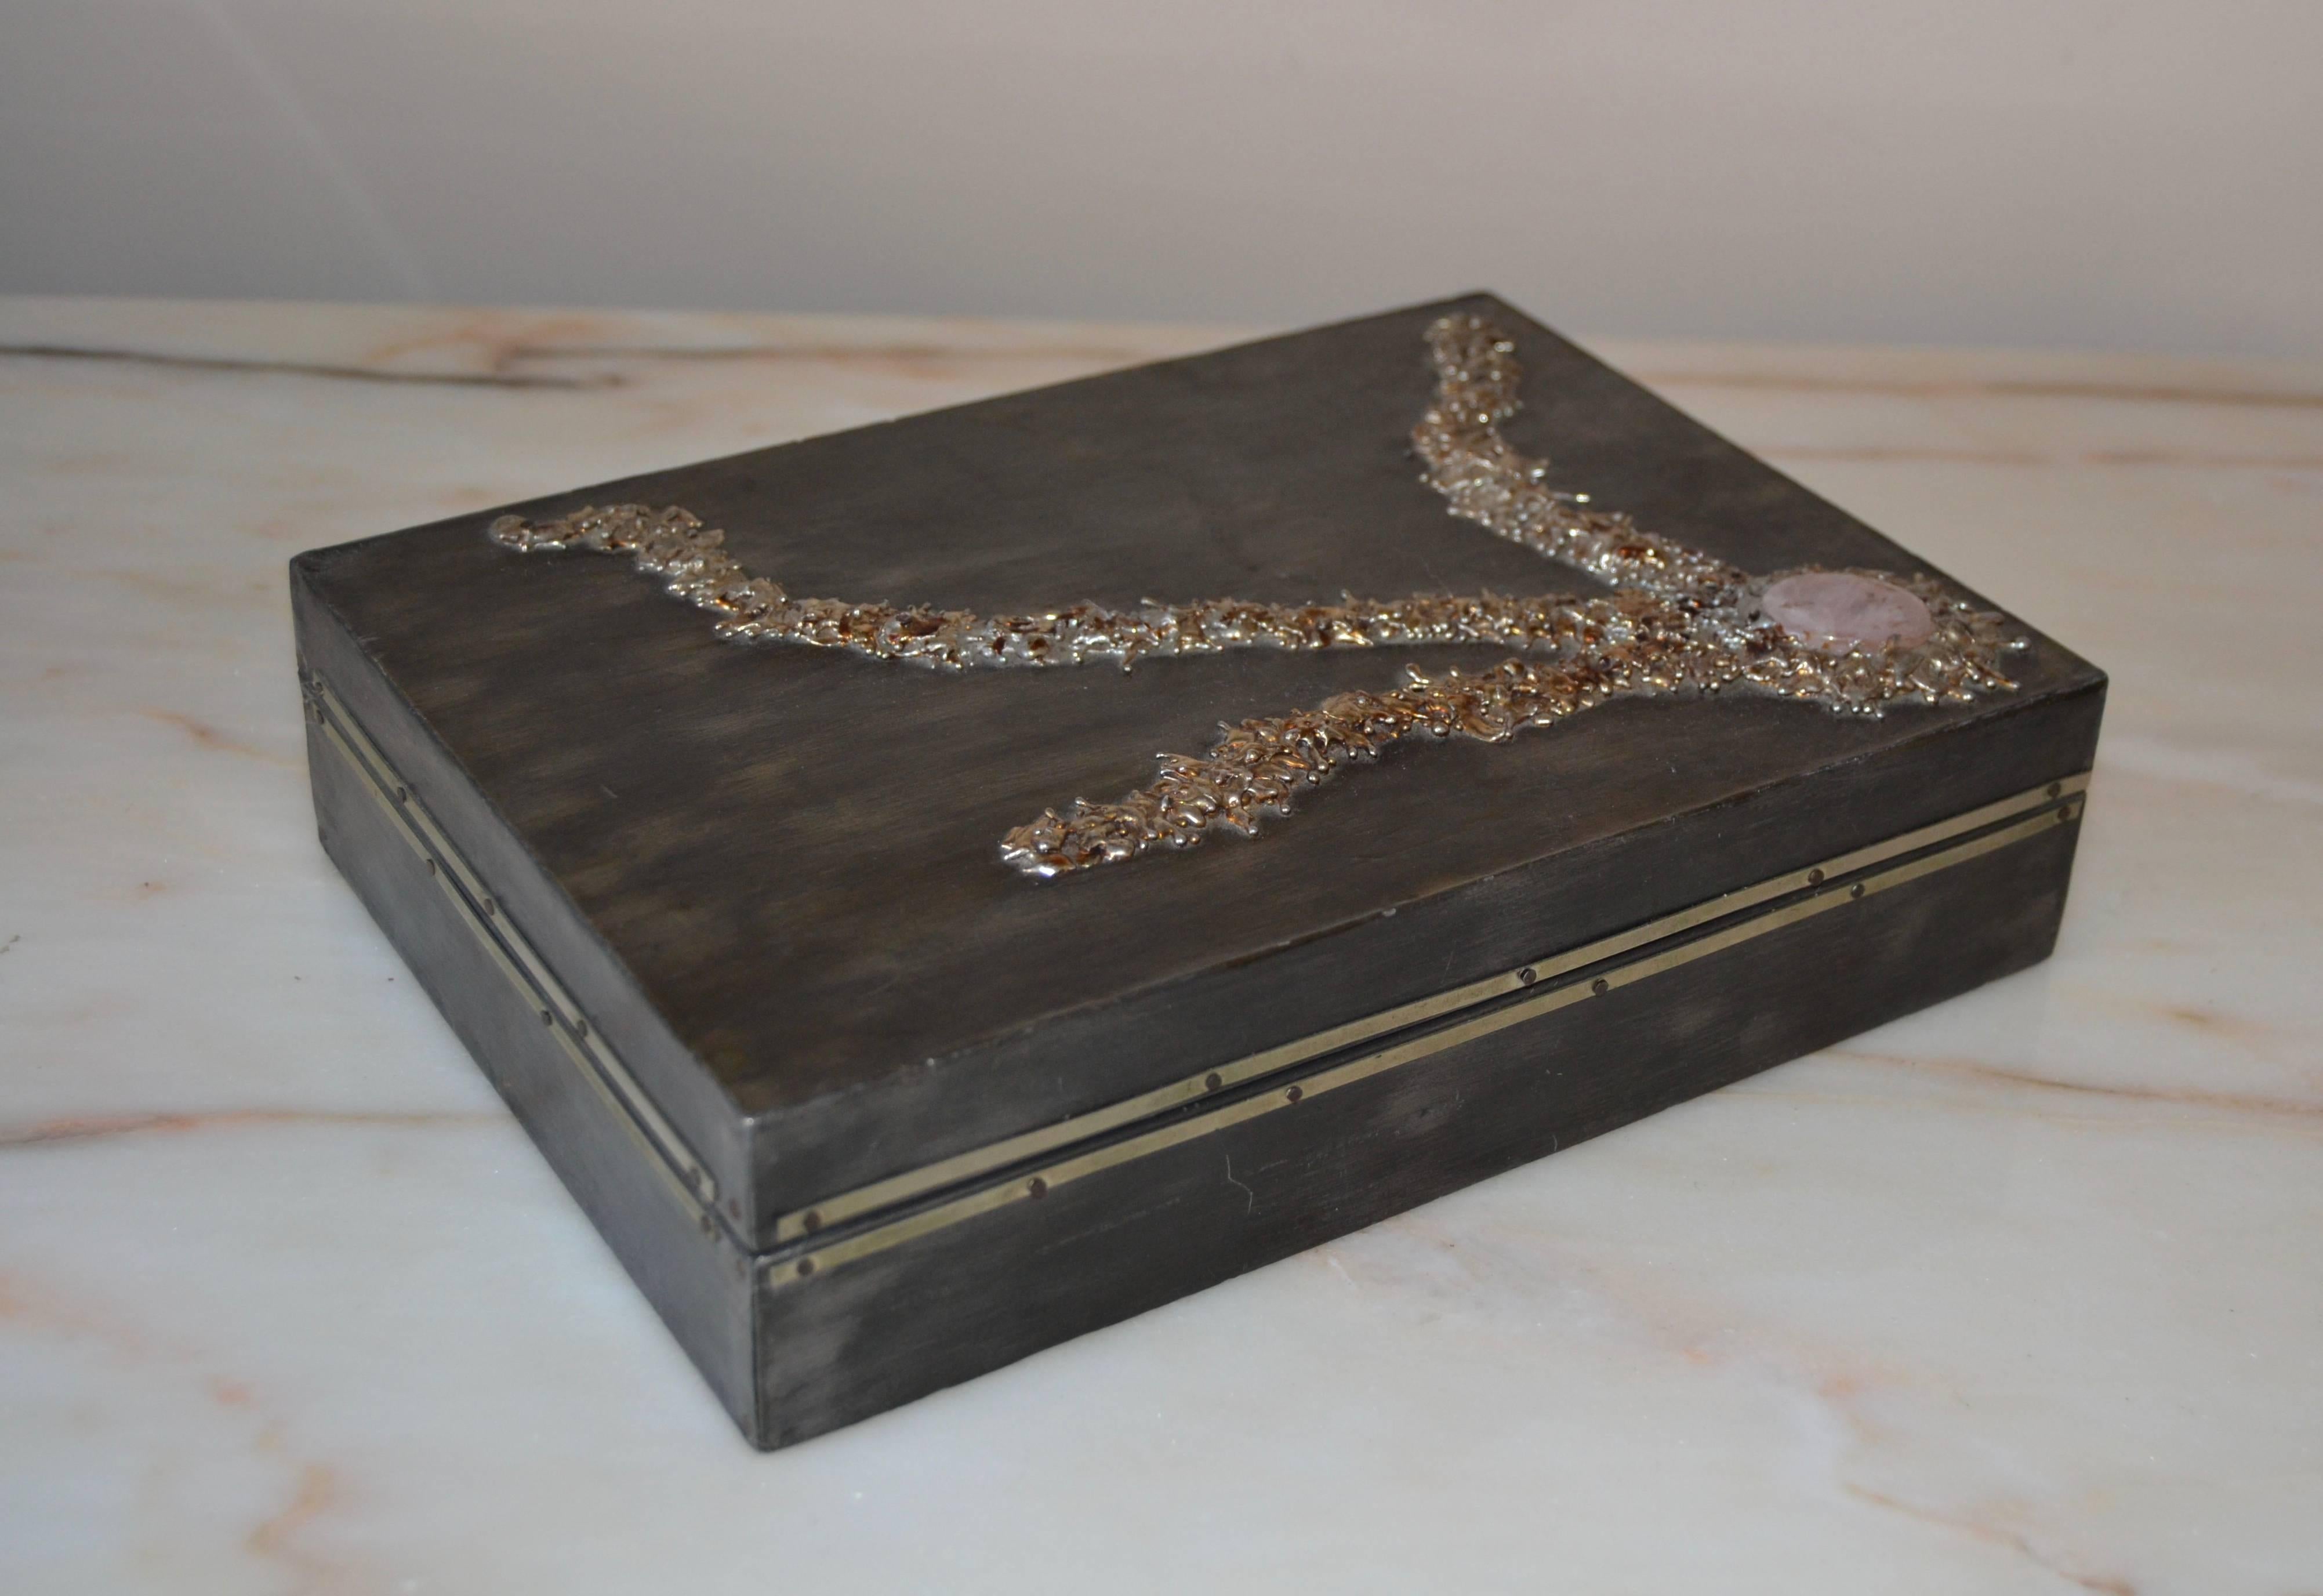 1970s sculptural metalwork and quartz box with wood interior
Great work of quality
Signed.